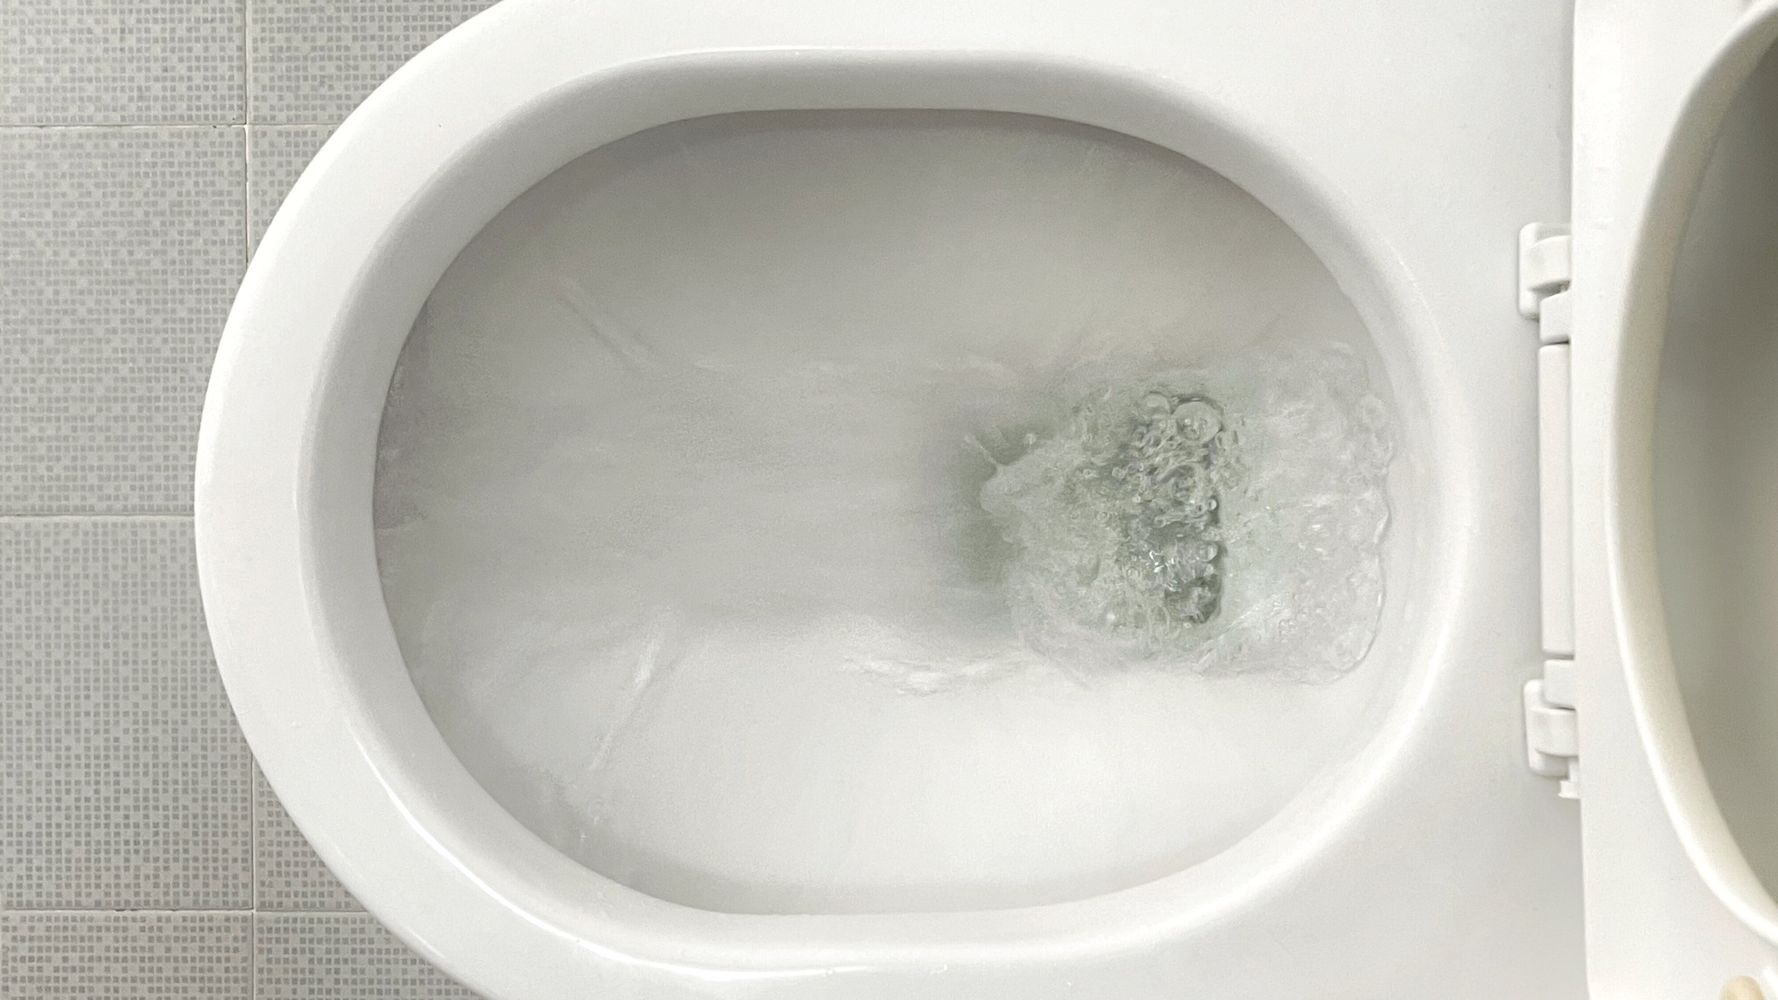 Read This If You Always Pee 'Just In Case,' Even If You Don't Have To